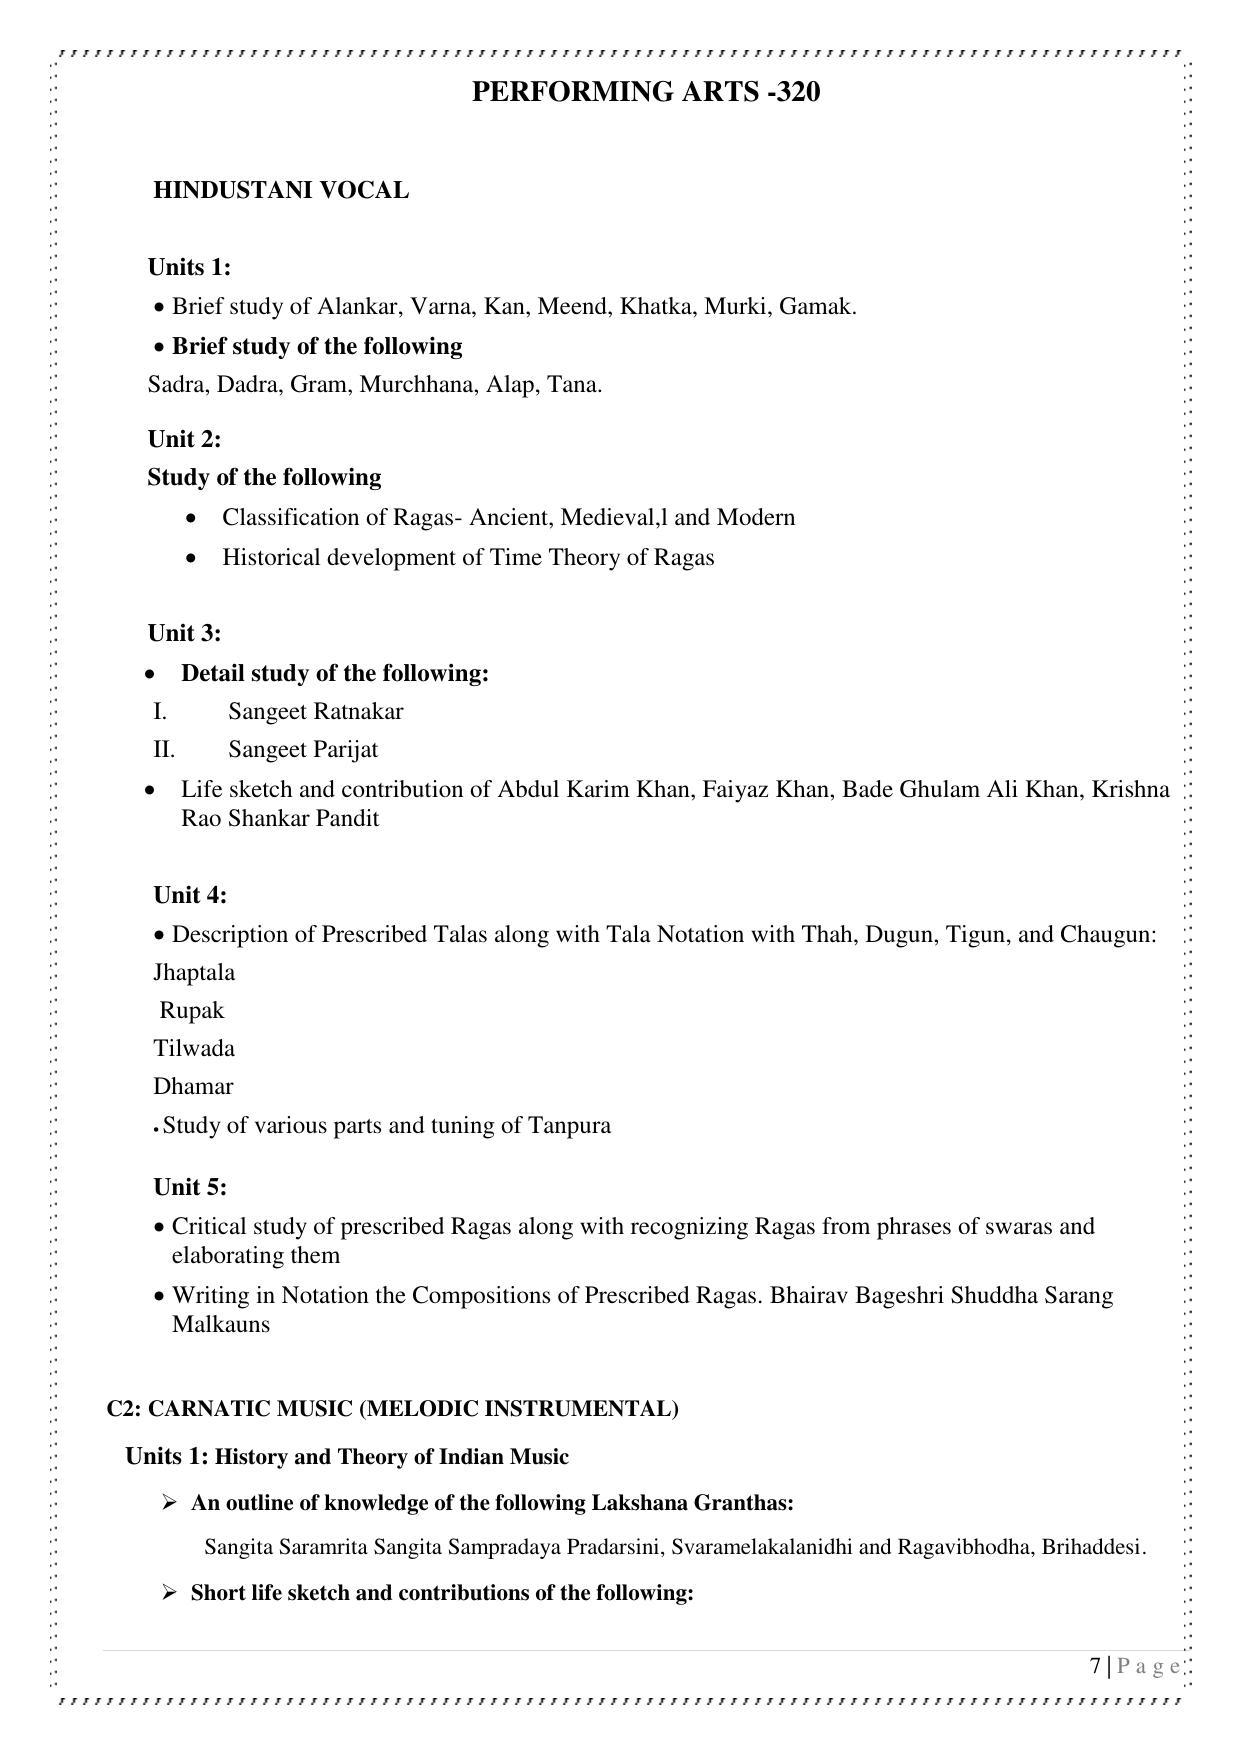 CUET Syllabus for Performing Arts (English) - Page 7